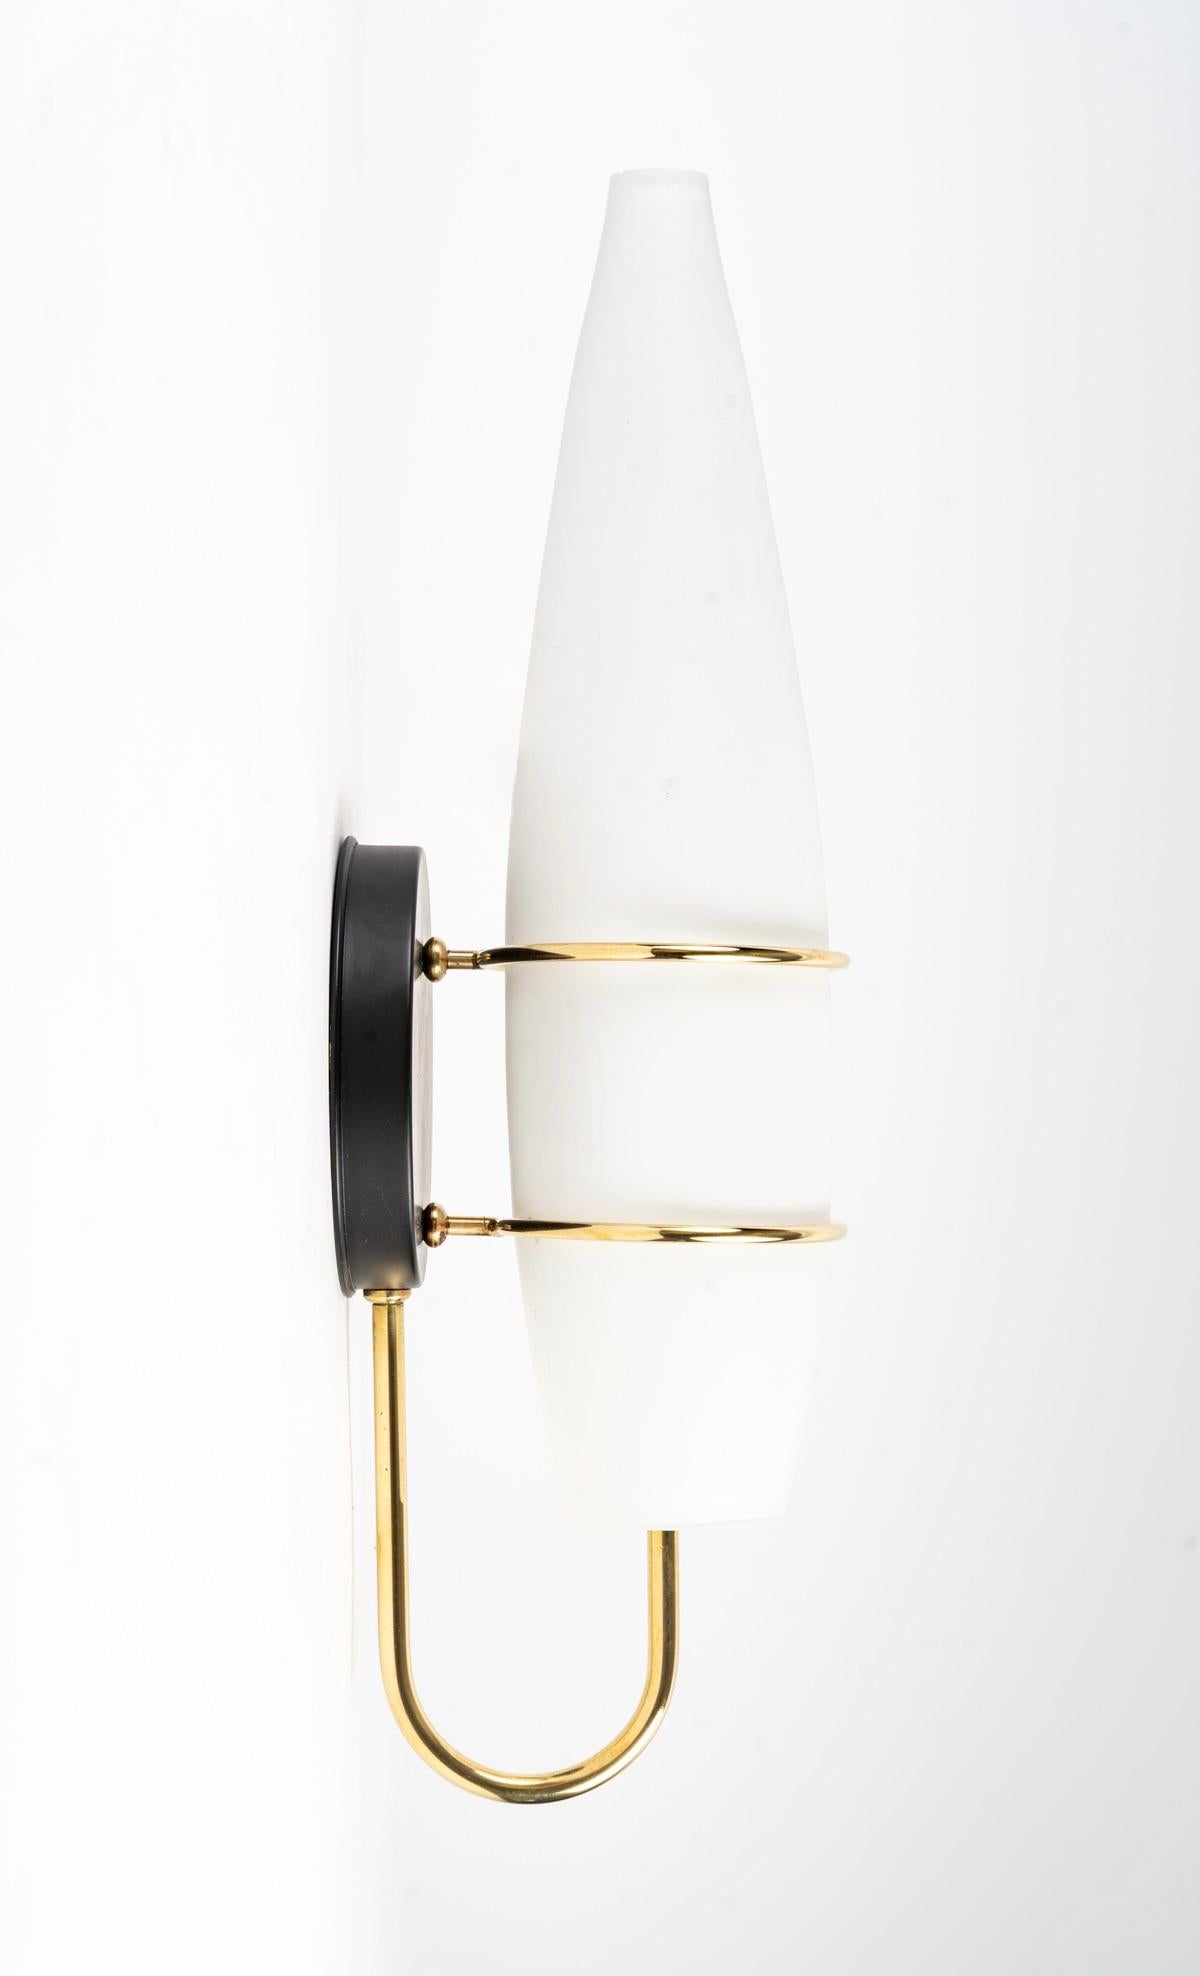 Pair of Maison Lunel 1950 wall lights.

Composed of a large opalescent white opaline in the shape of a spindle, held by two circles in gilded brass.
A curved golden brass rod extends from the lower base of the round shaped wall bracket in black